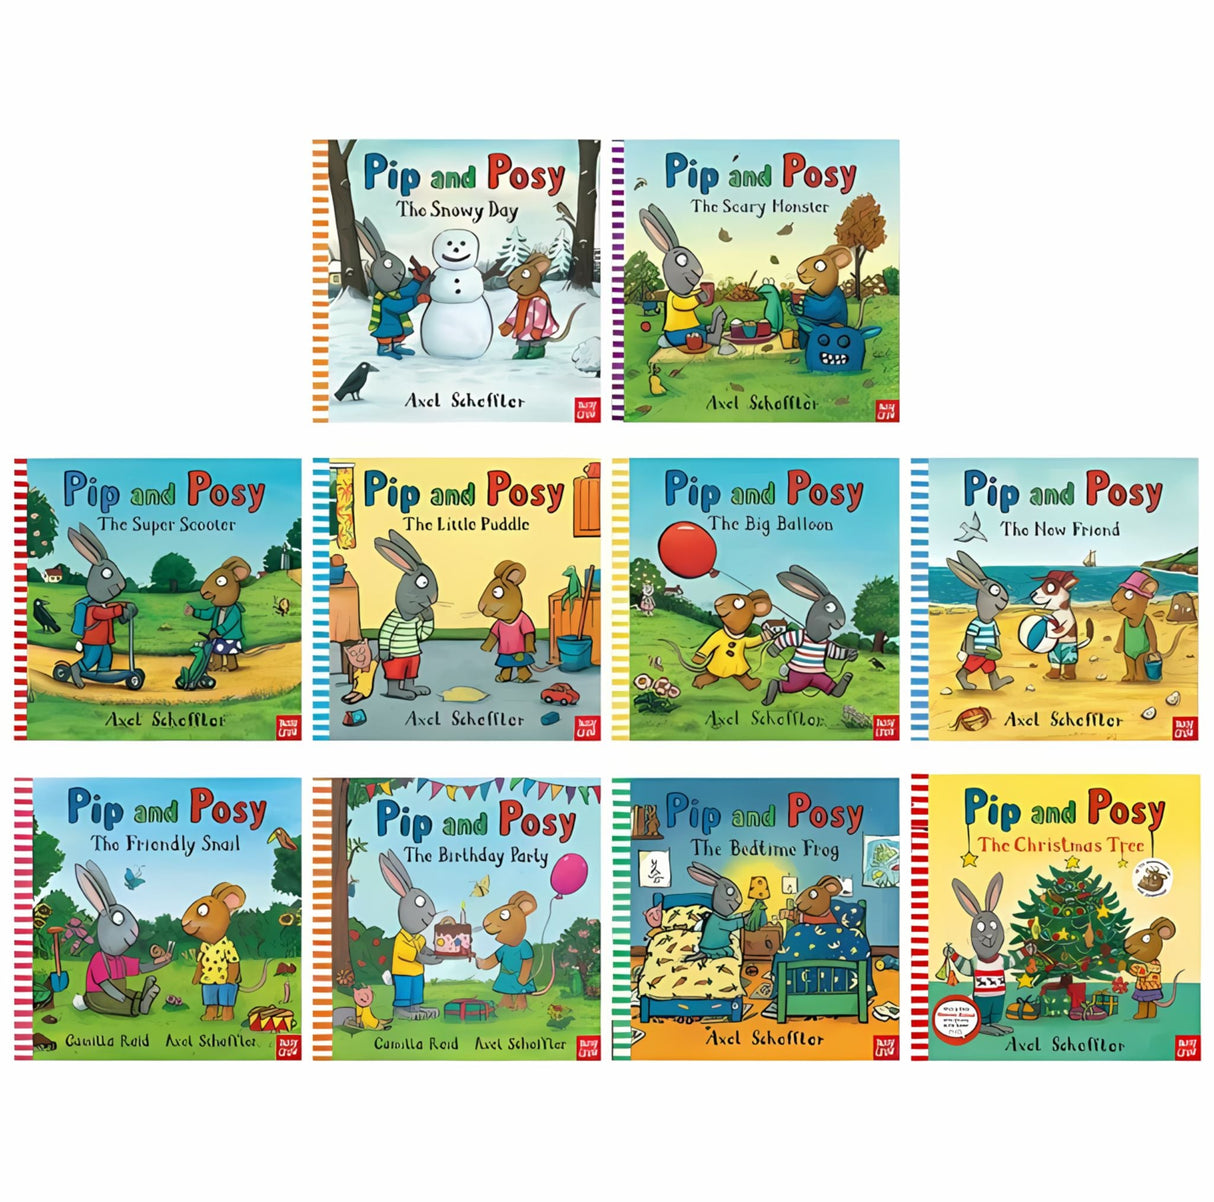 Pip and Posy 10 books